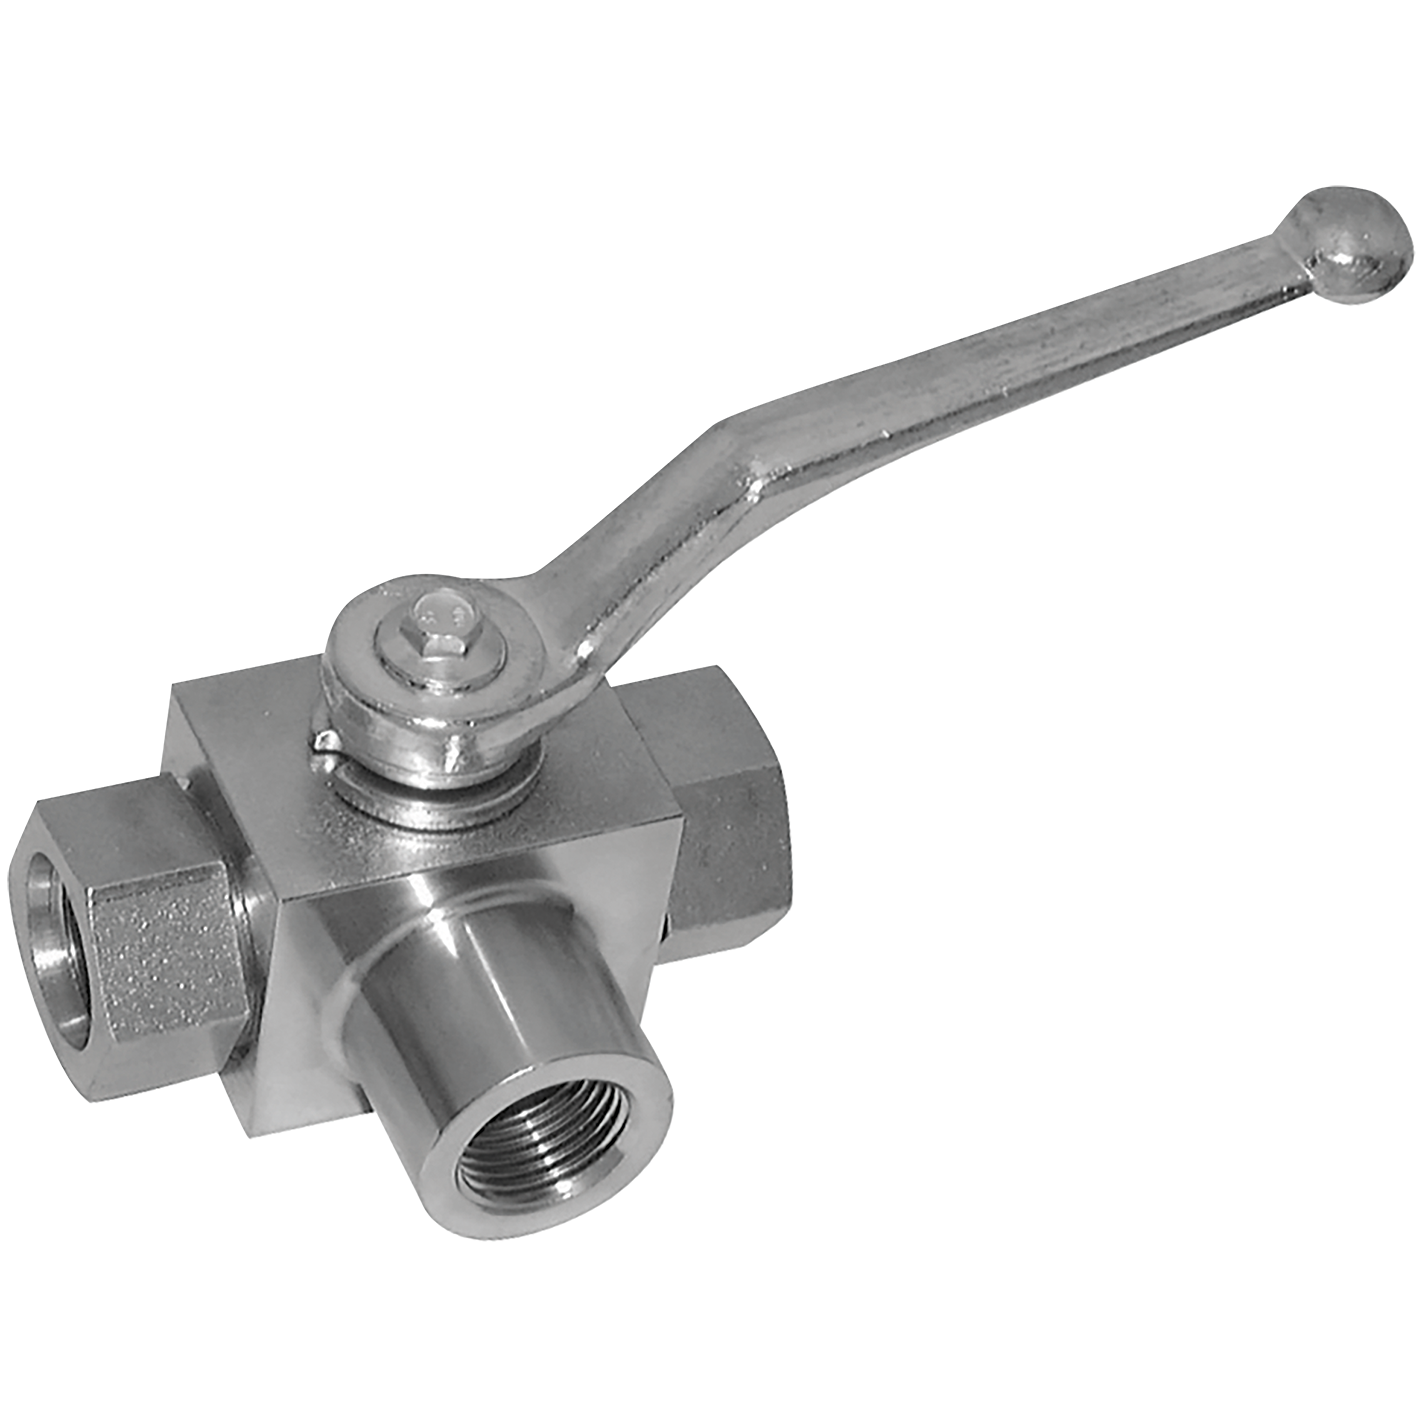 1.1/2" BSP Parallel Female 3 Way T Ported Ball Valve